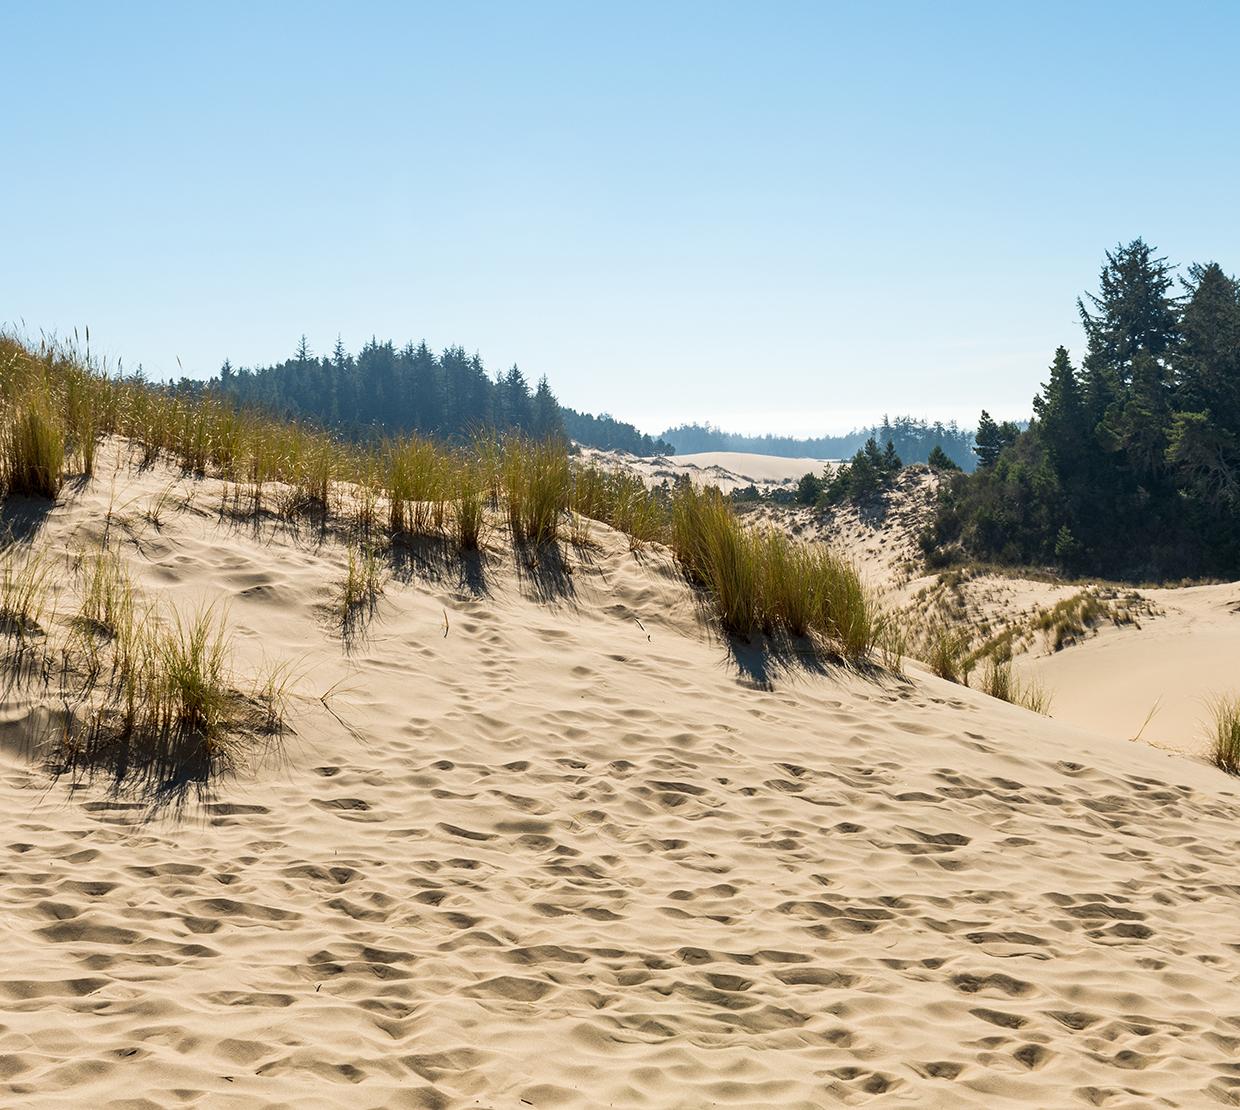 Picture with sand dune and dune grasses in the foreground, evergreens and sky in the background, taken from a high point above the Oregon Dunes